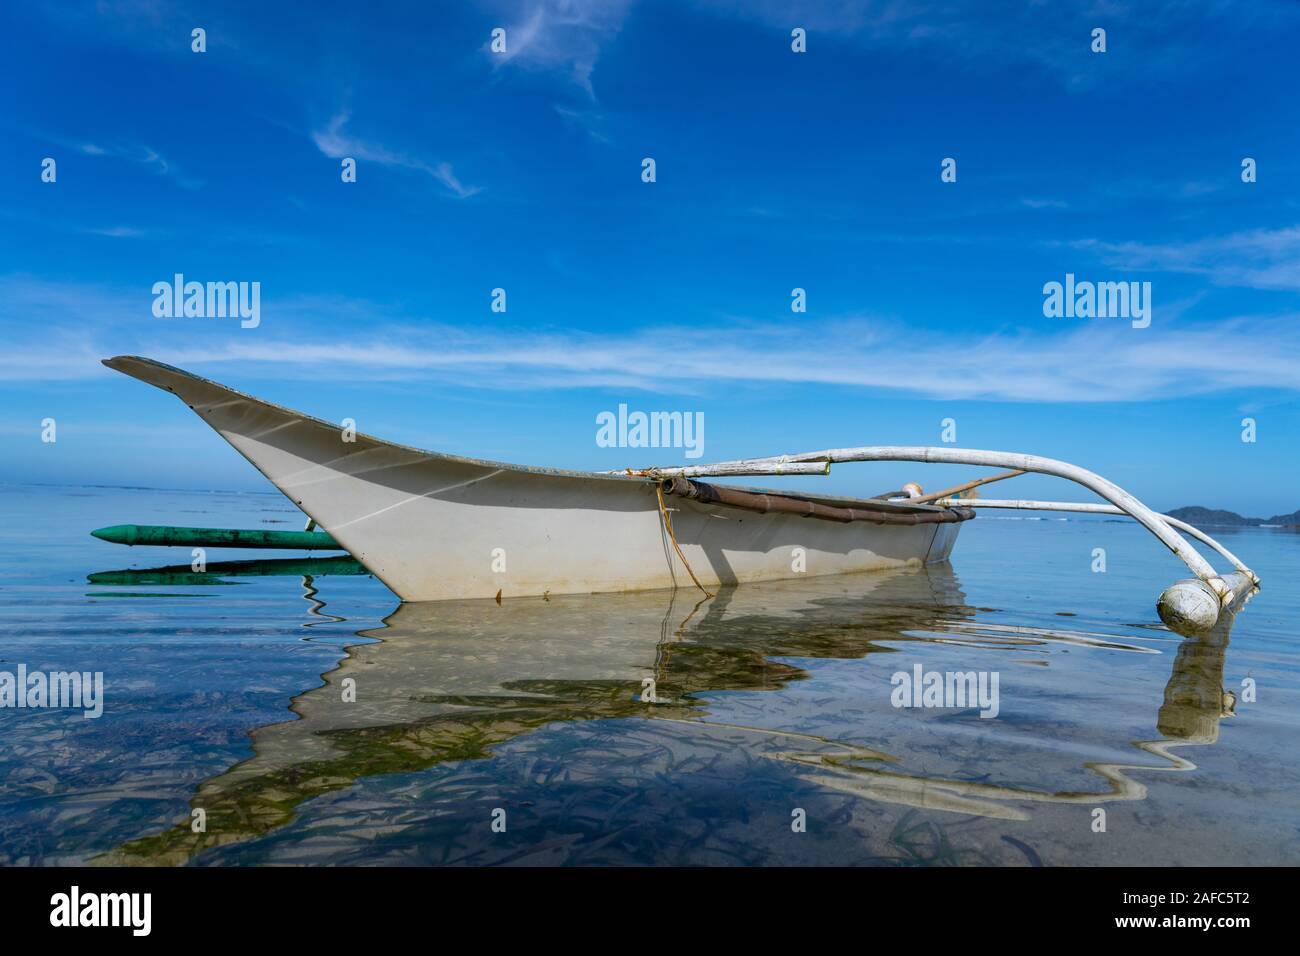 A small outrigger boat known as a Banca in the Philippines moored in calm shallow water. Stock Photo